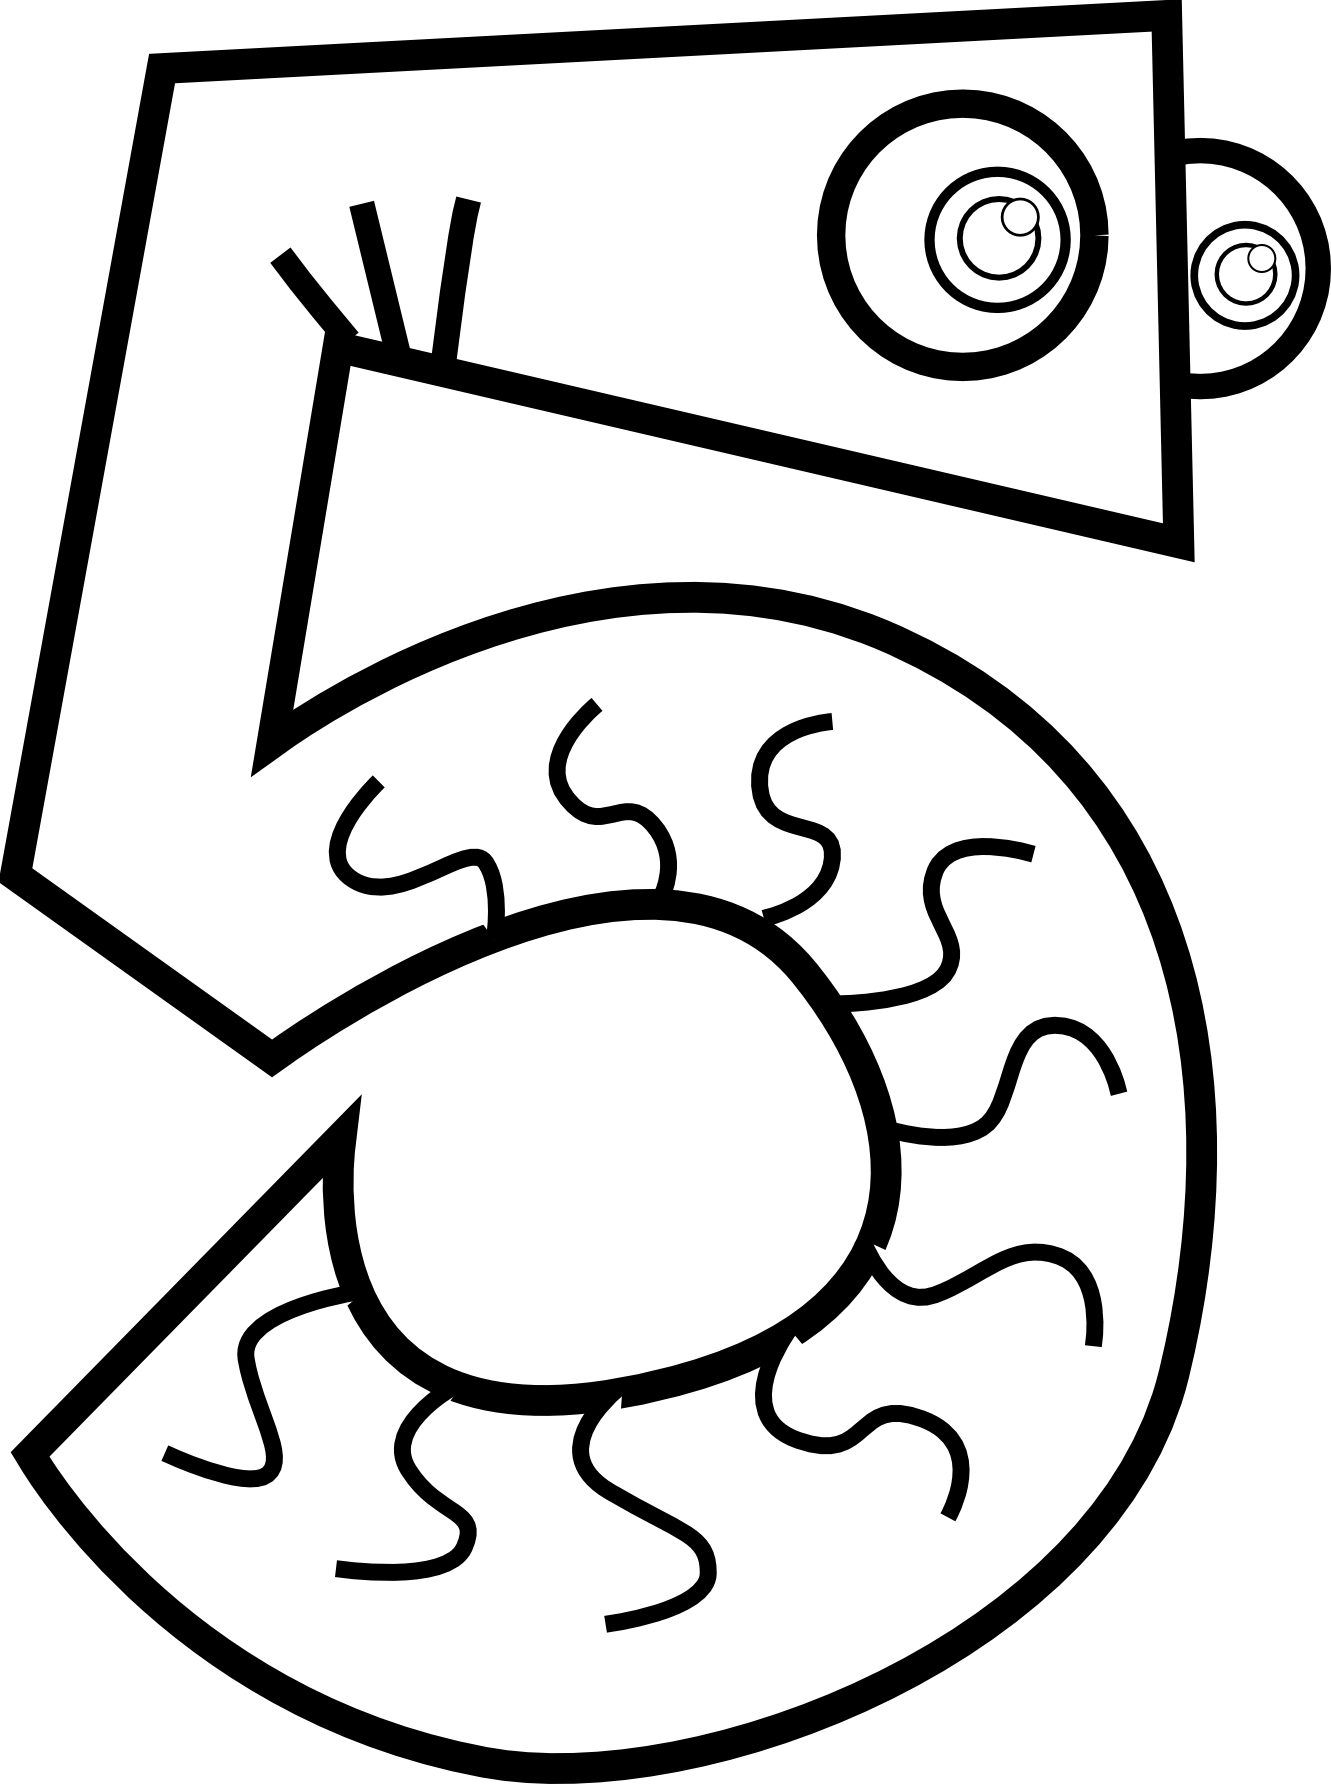 clip art page numbers - photo #31